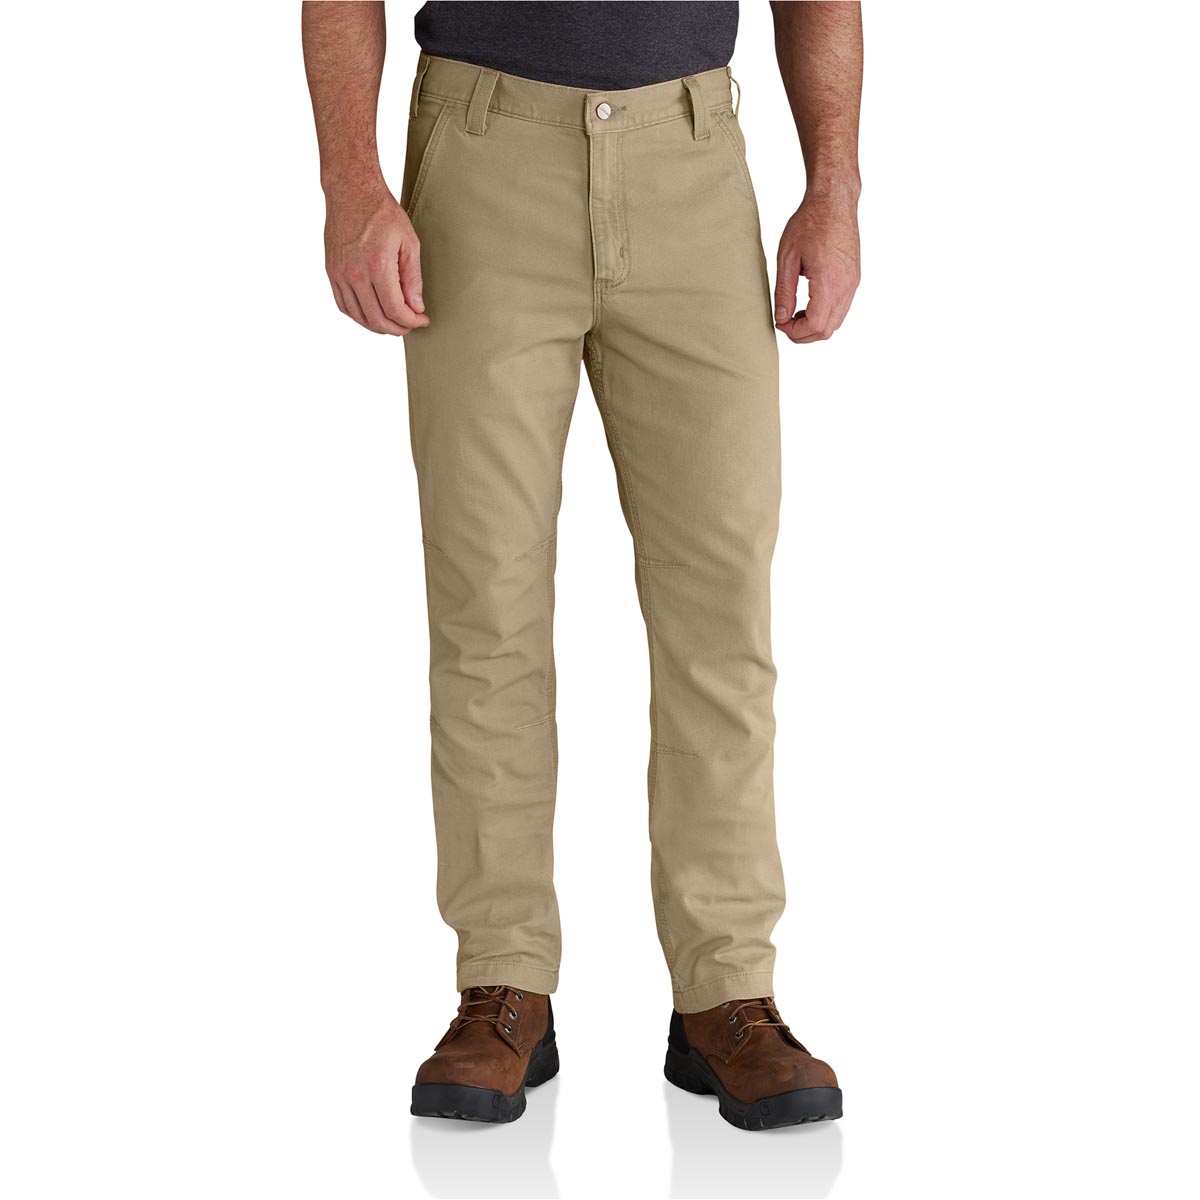 Product Name: Carhartt Men's Rugged Flex Rigby Dungaree Stretch Work Pants